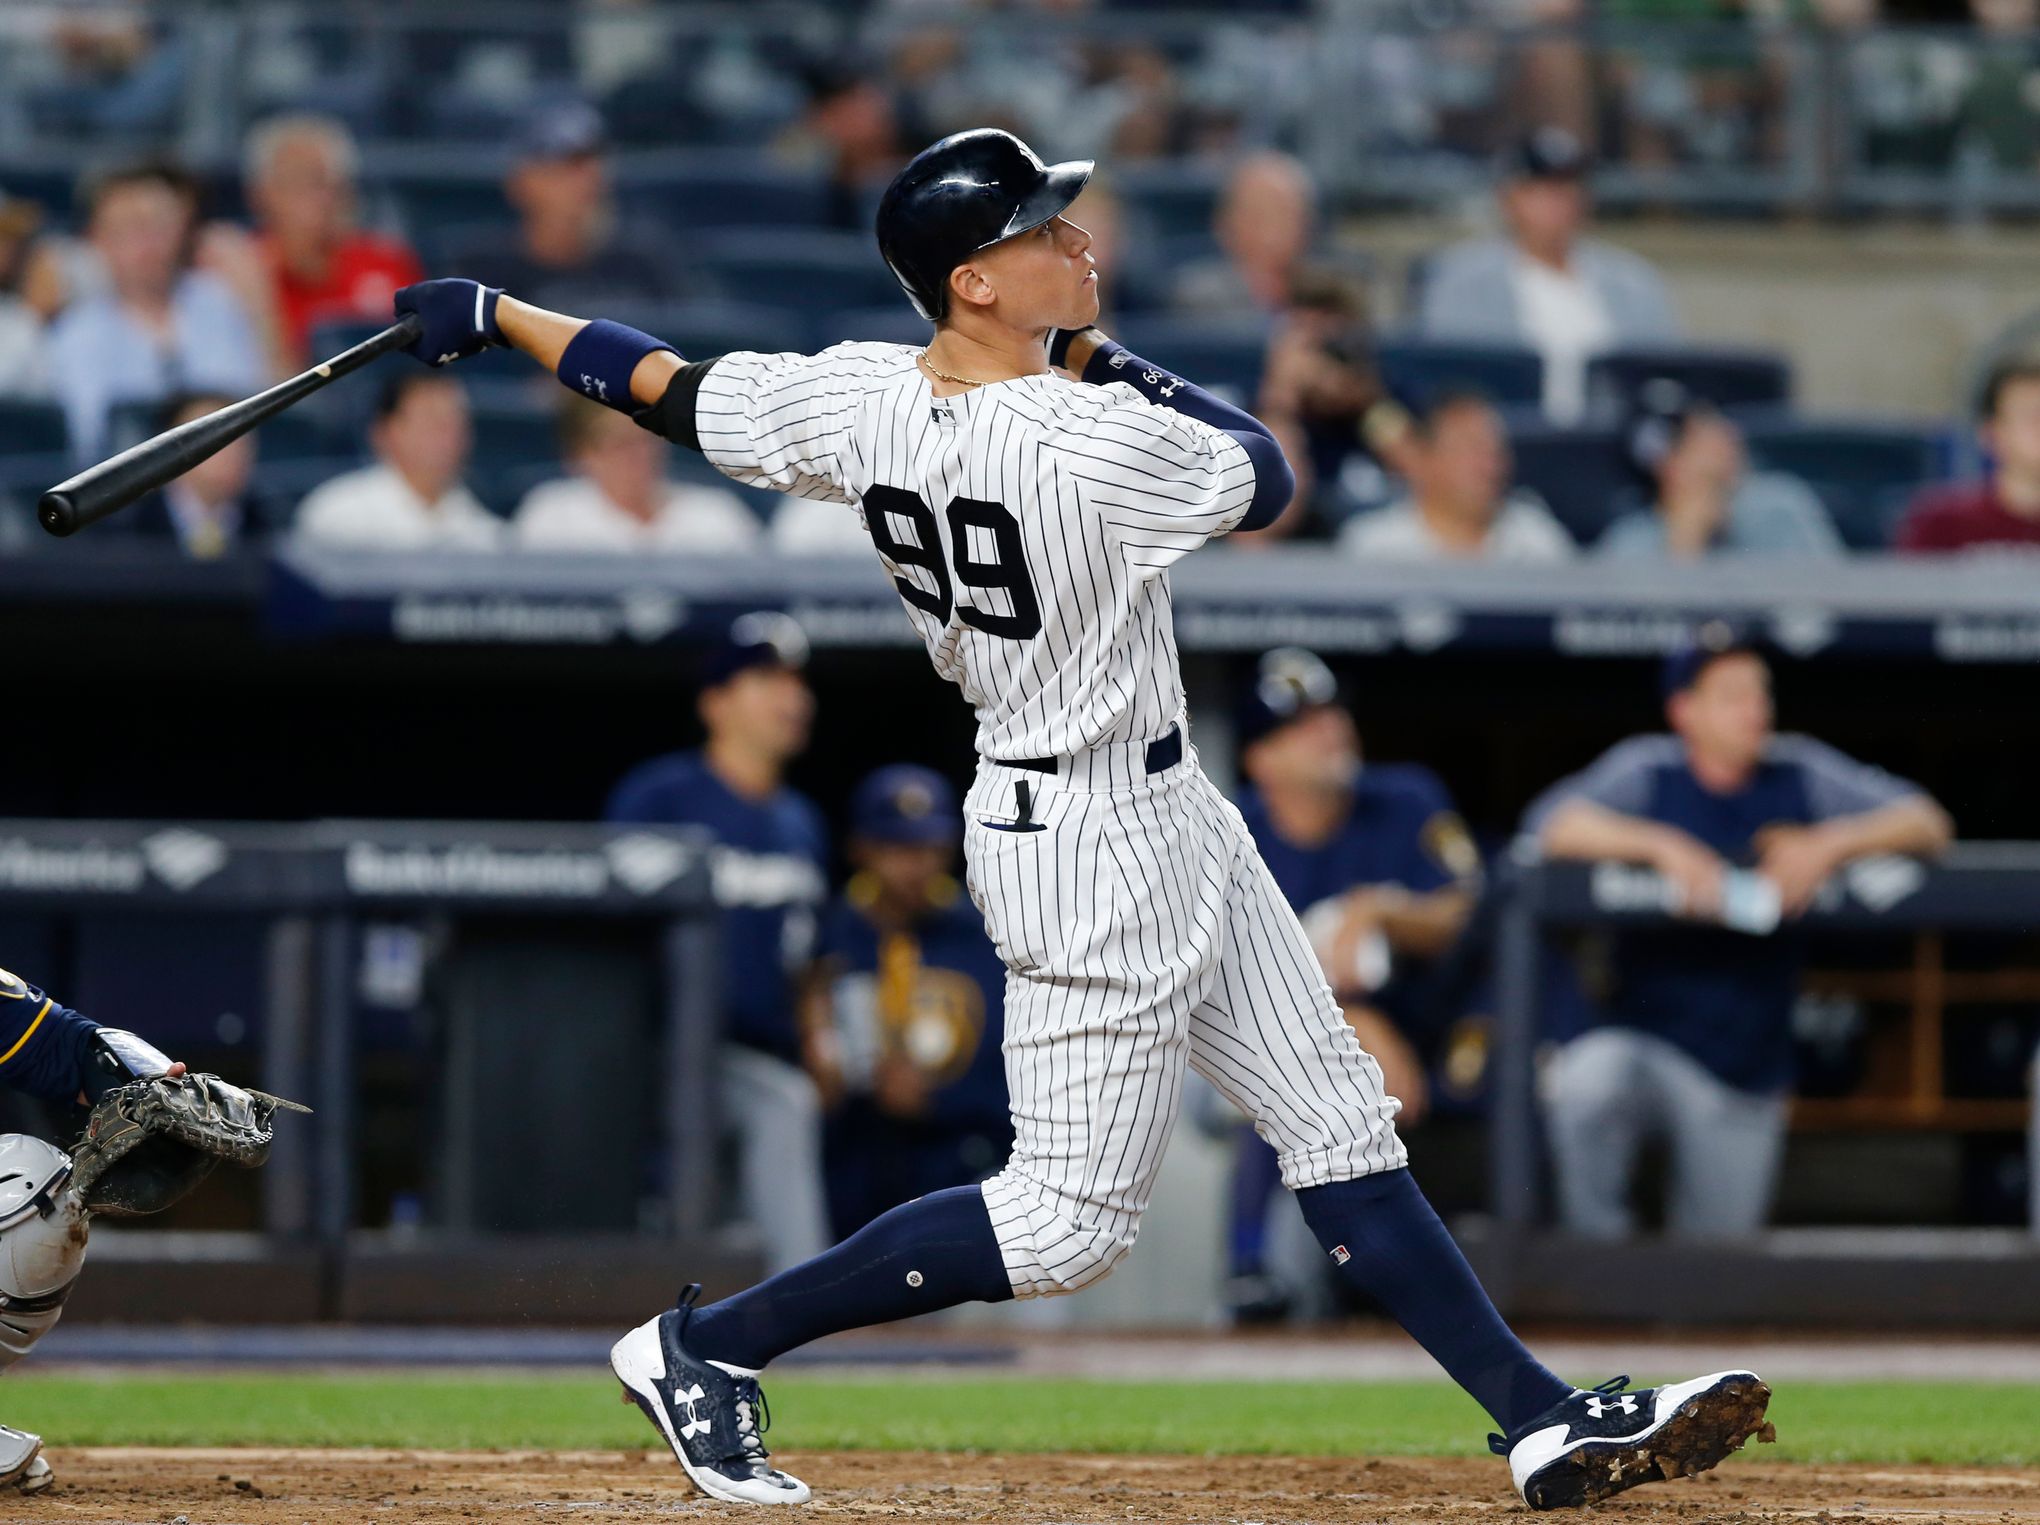 Yankees Rookie Aaron Judge Has History to Overcome: His Height - WSJ